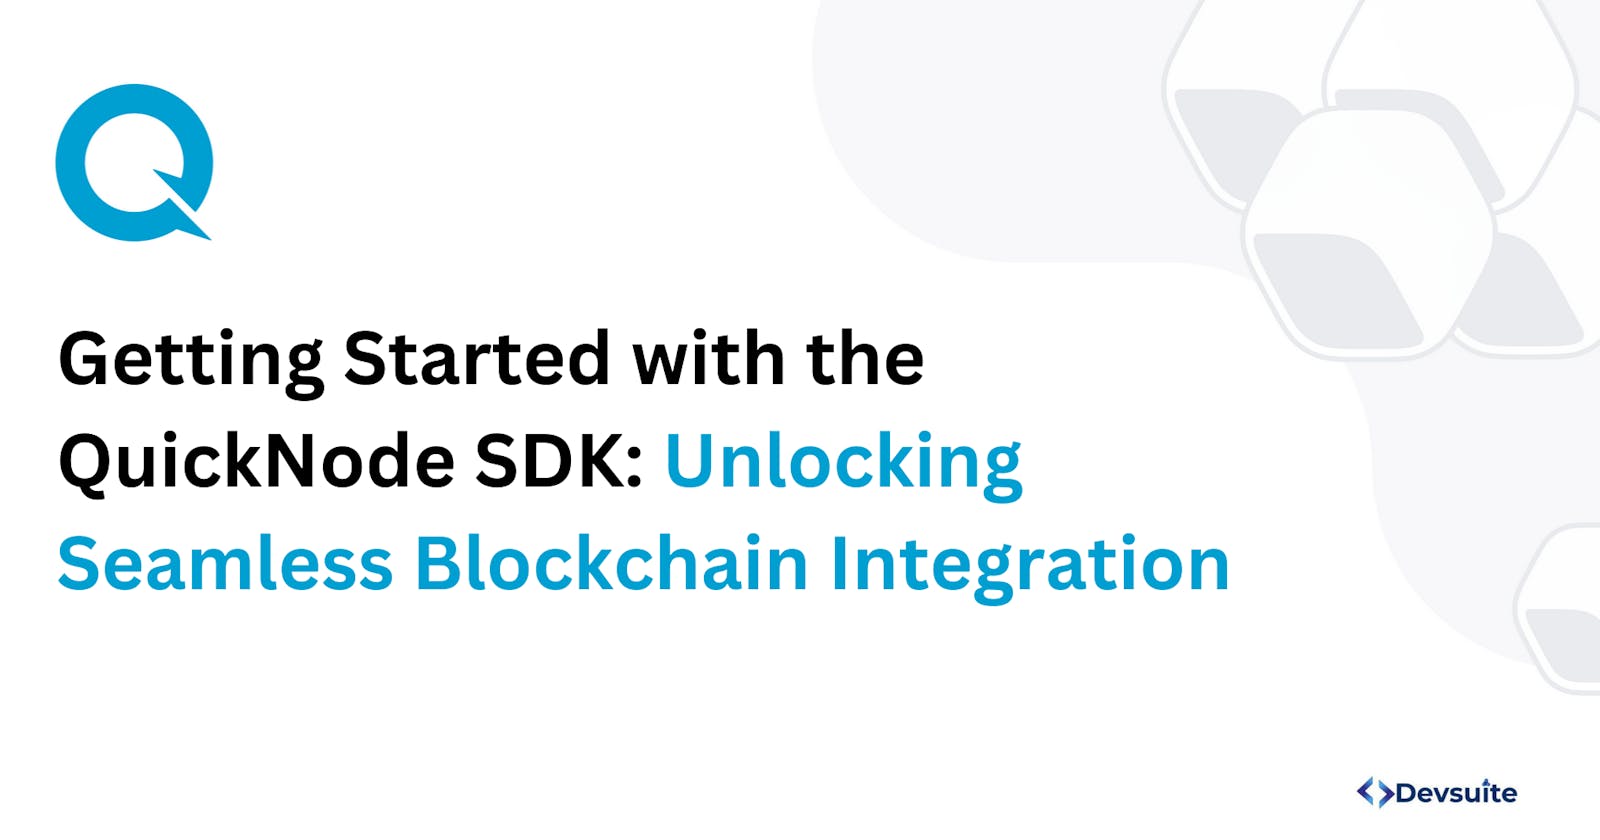 Getting Started with the QuickNode SDK: Unlocking Seamless Blockchain Integration